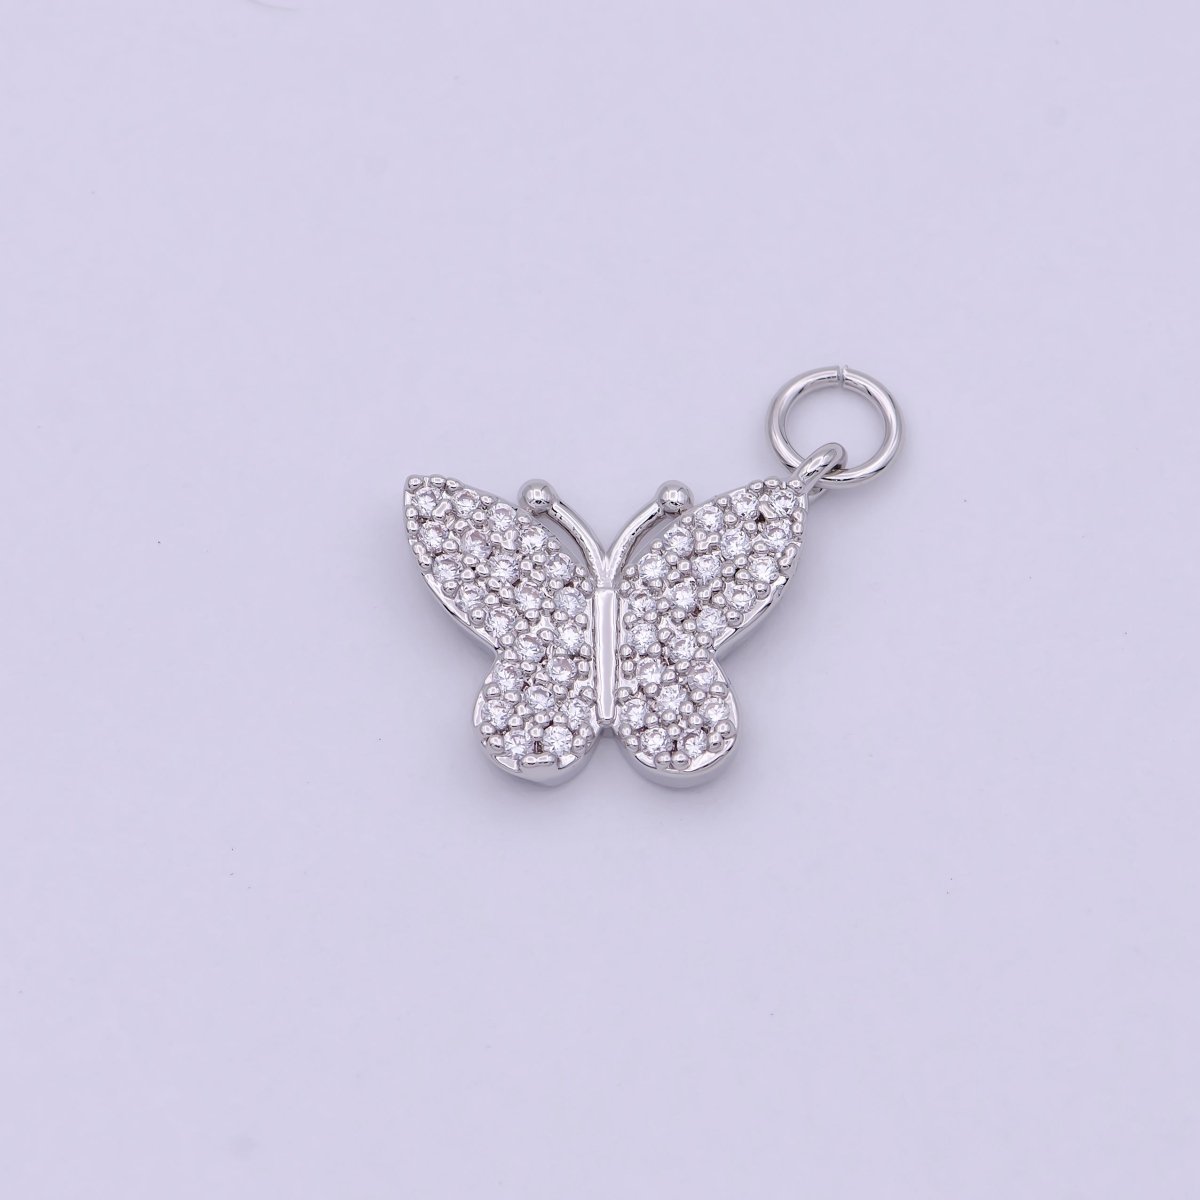 Dainty Micro Pave Butterfly Charm Rhodium White Gold Butterfly Pendant for Necklace Bracelet Earring Charm Jewelry Making Supply, C-487 - DLUXCA